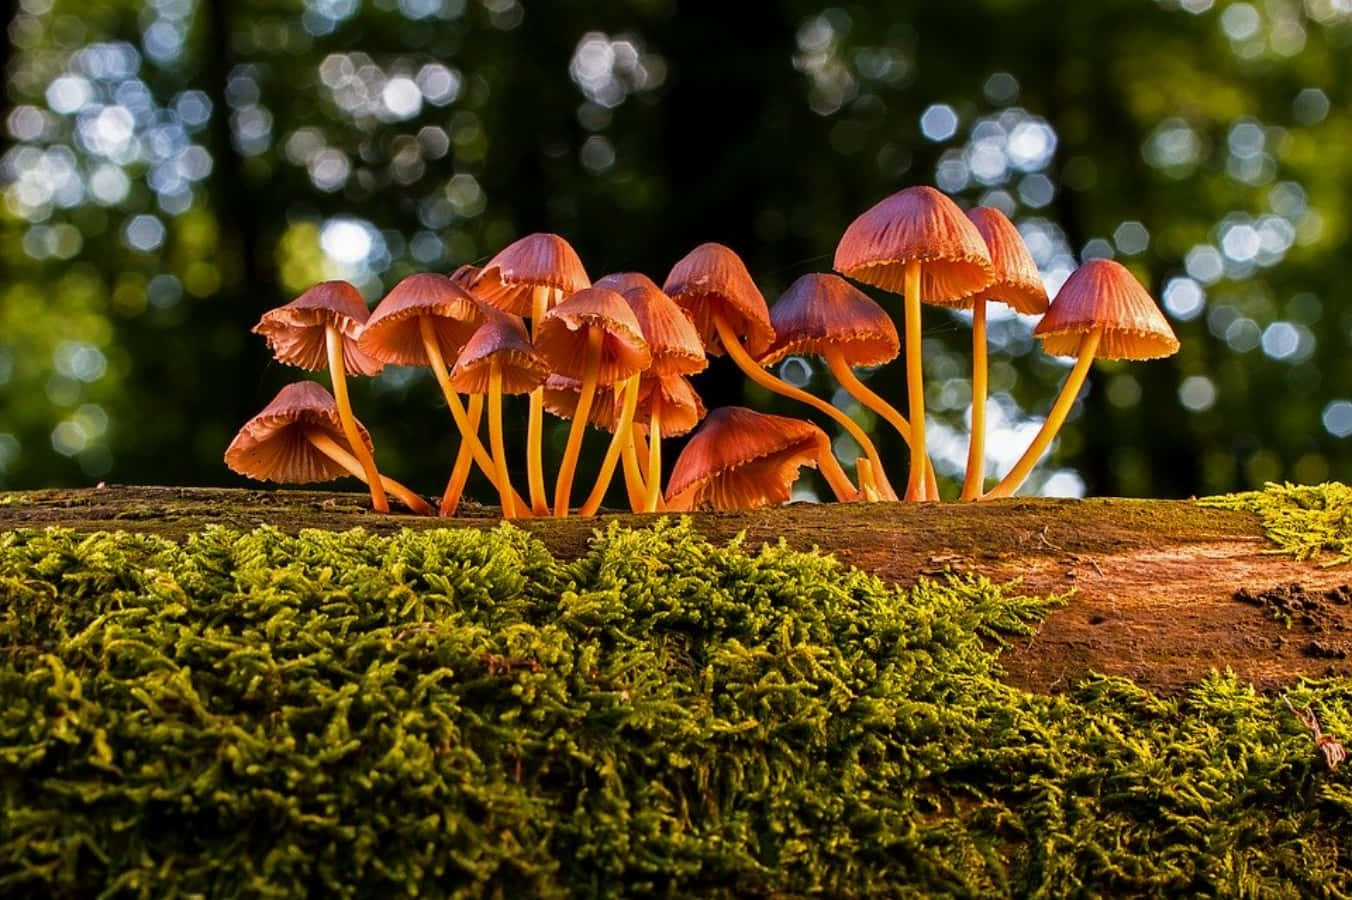 Mushrooms Growing On A Log In The Forest